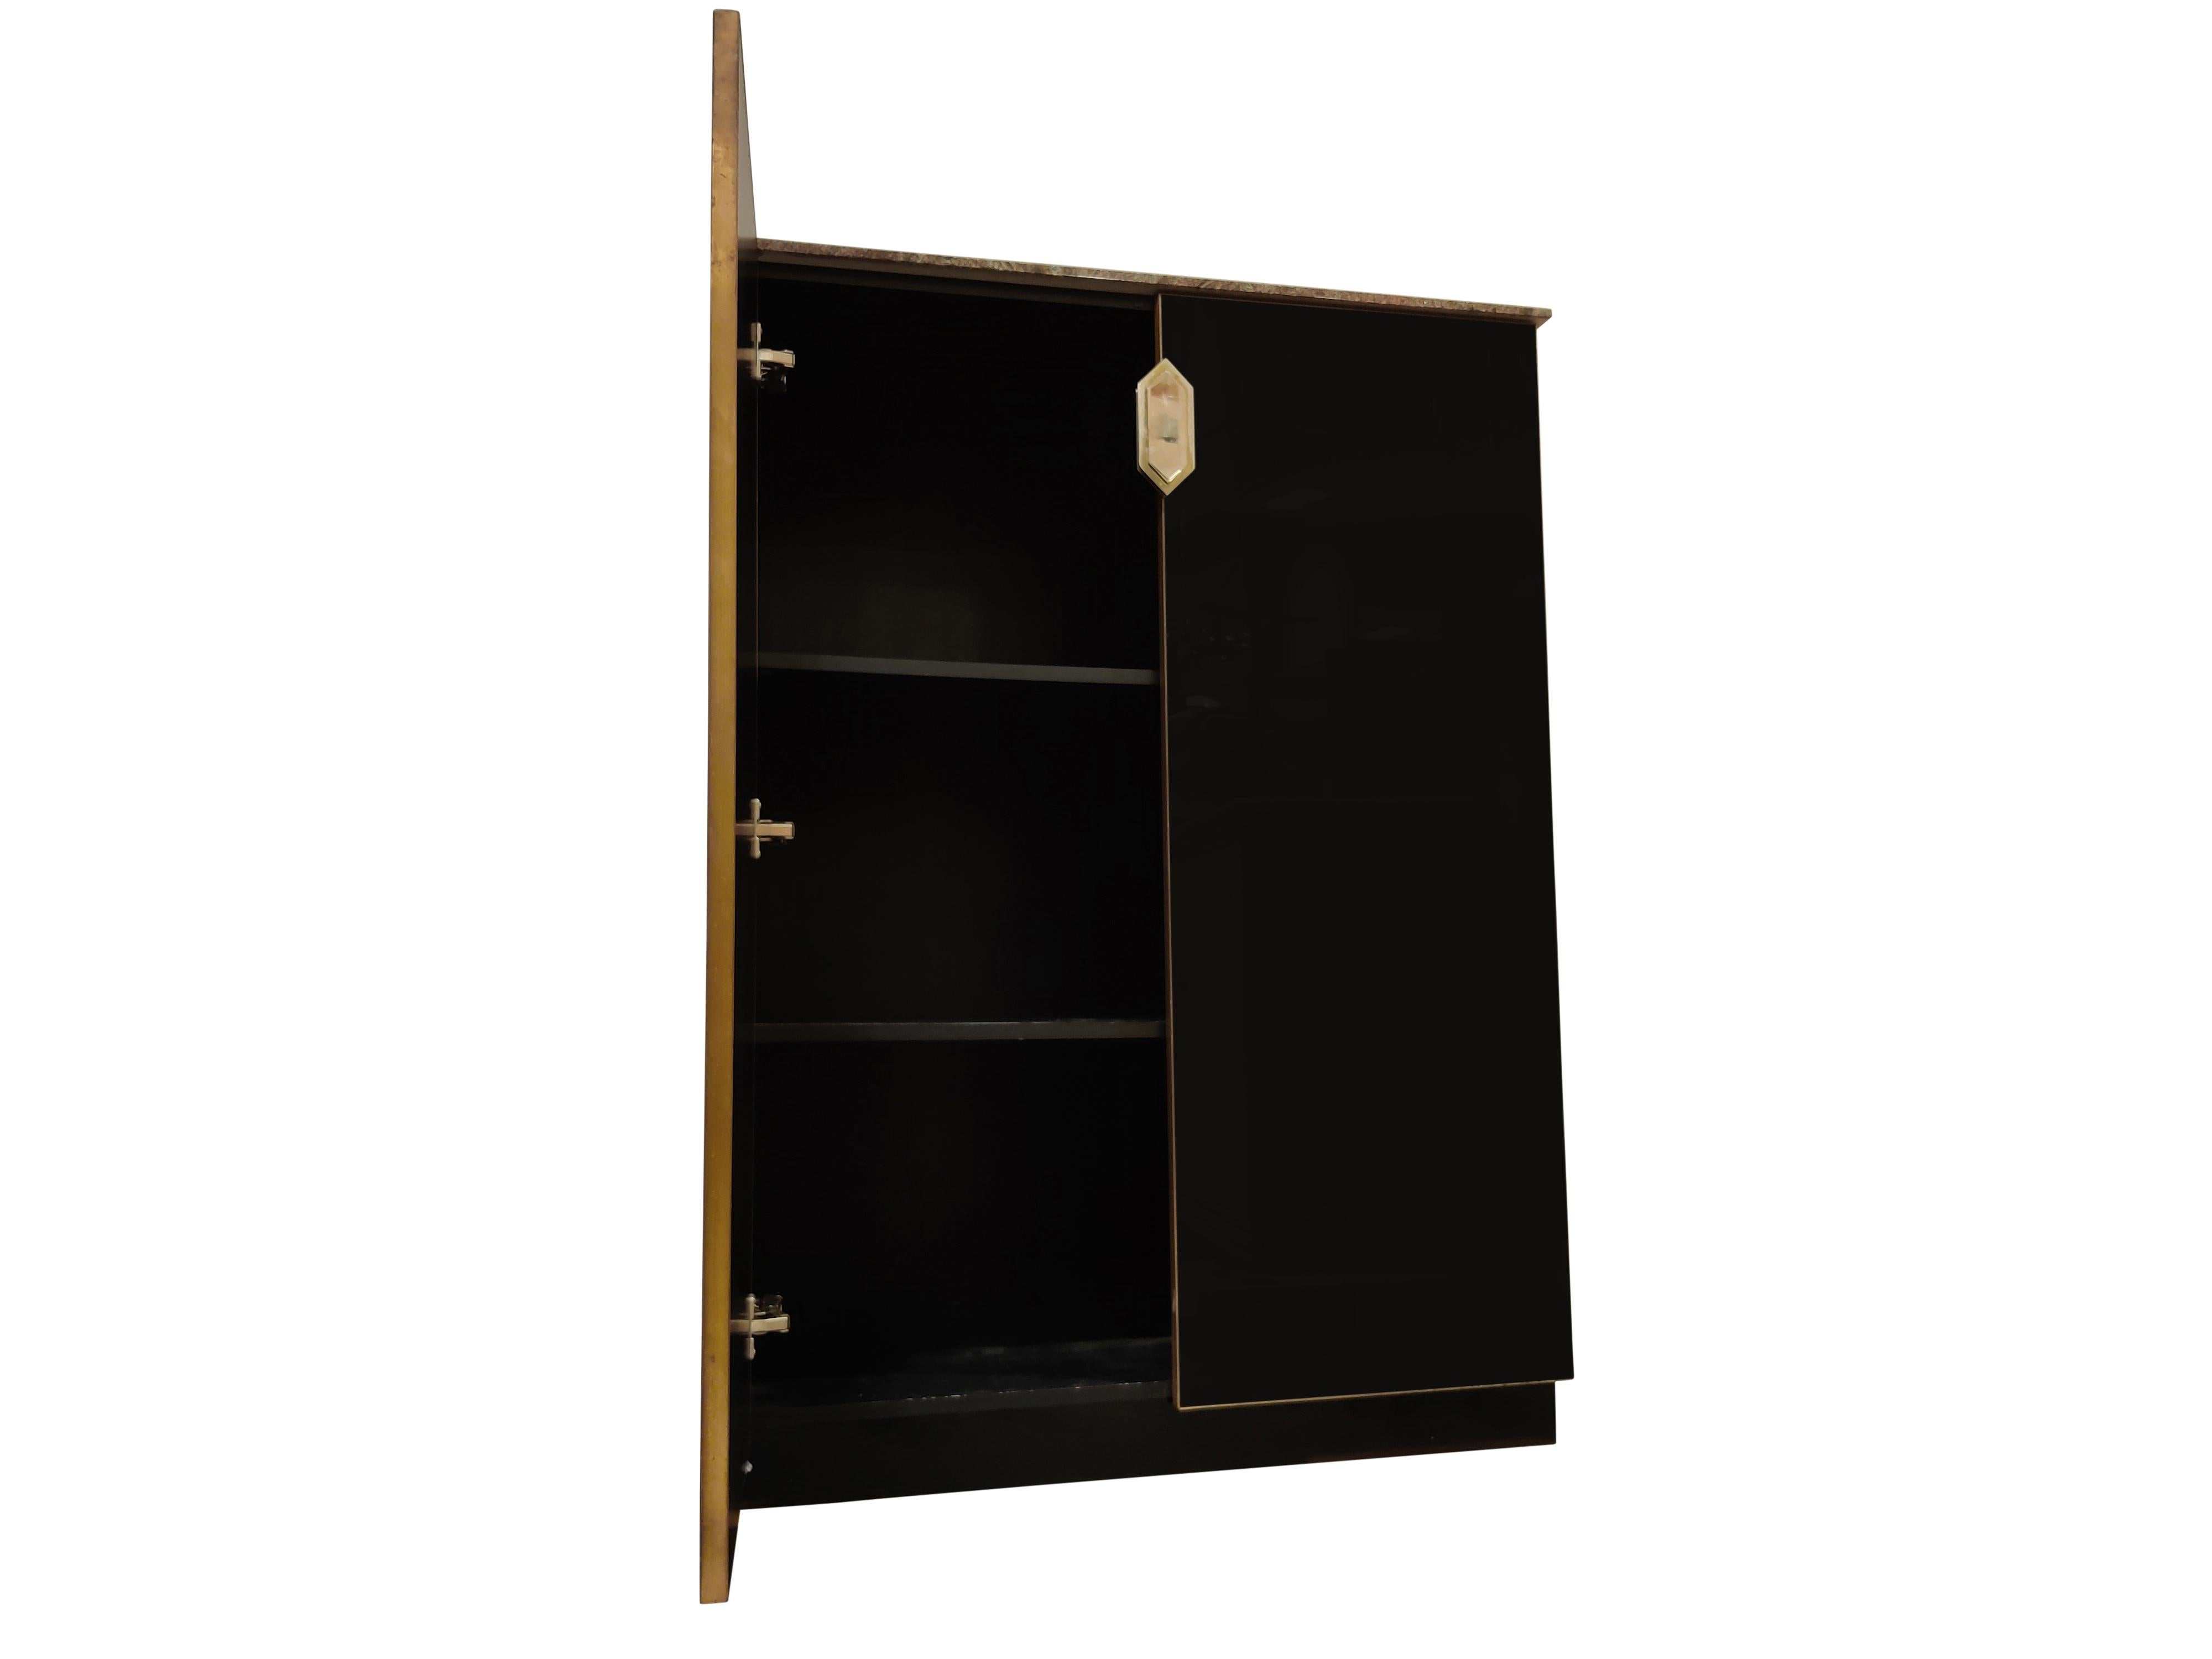 Hollywood Regency black glass and brass bar cabinet with a beautiful granite stone top.

It features 2 doors with a nicely shaped door handle and two shelves - plenty of storage space for glasses and bottles. 

This pieces gives a great touch of